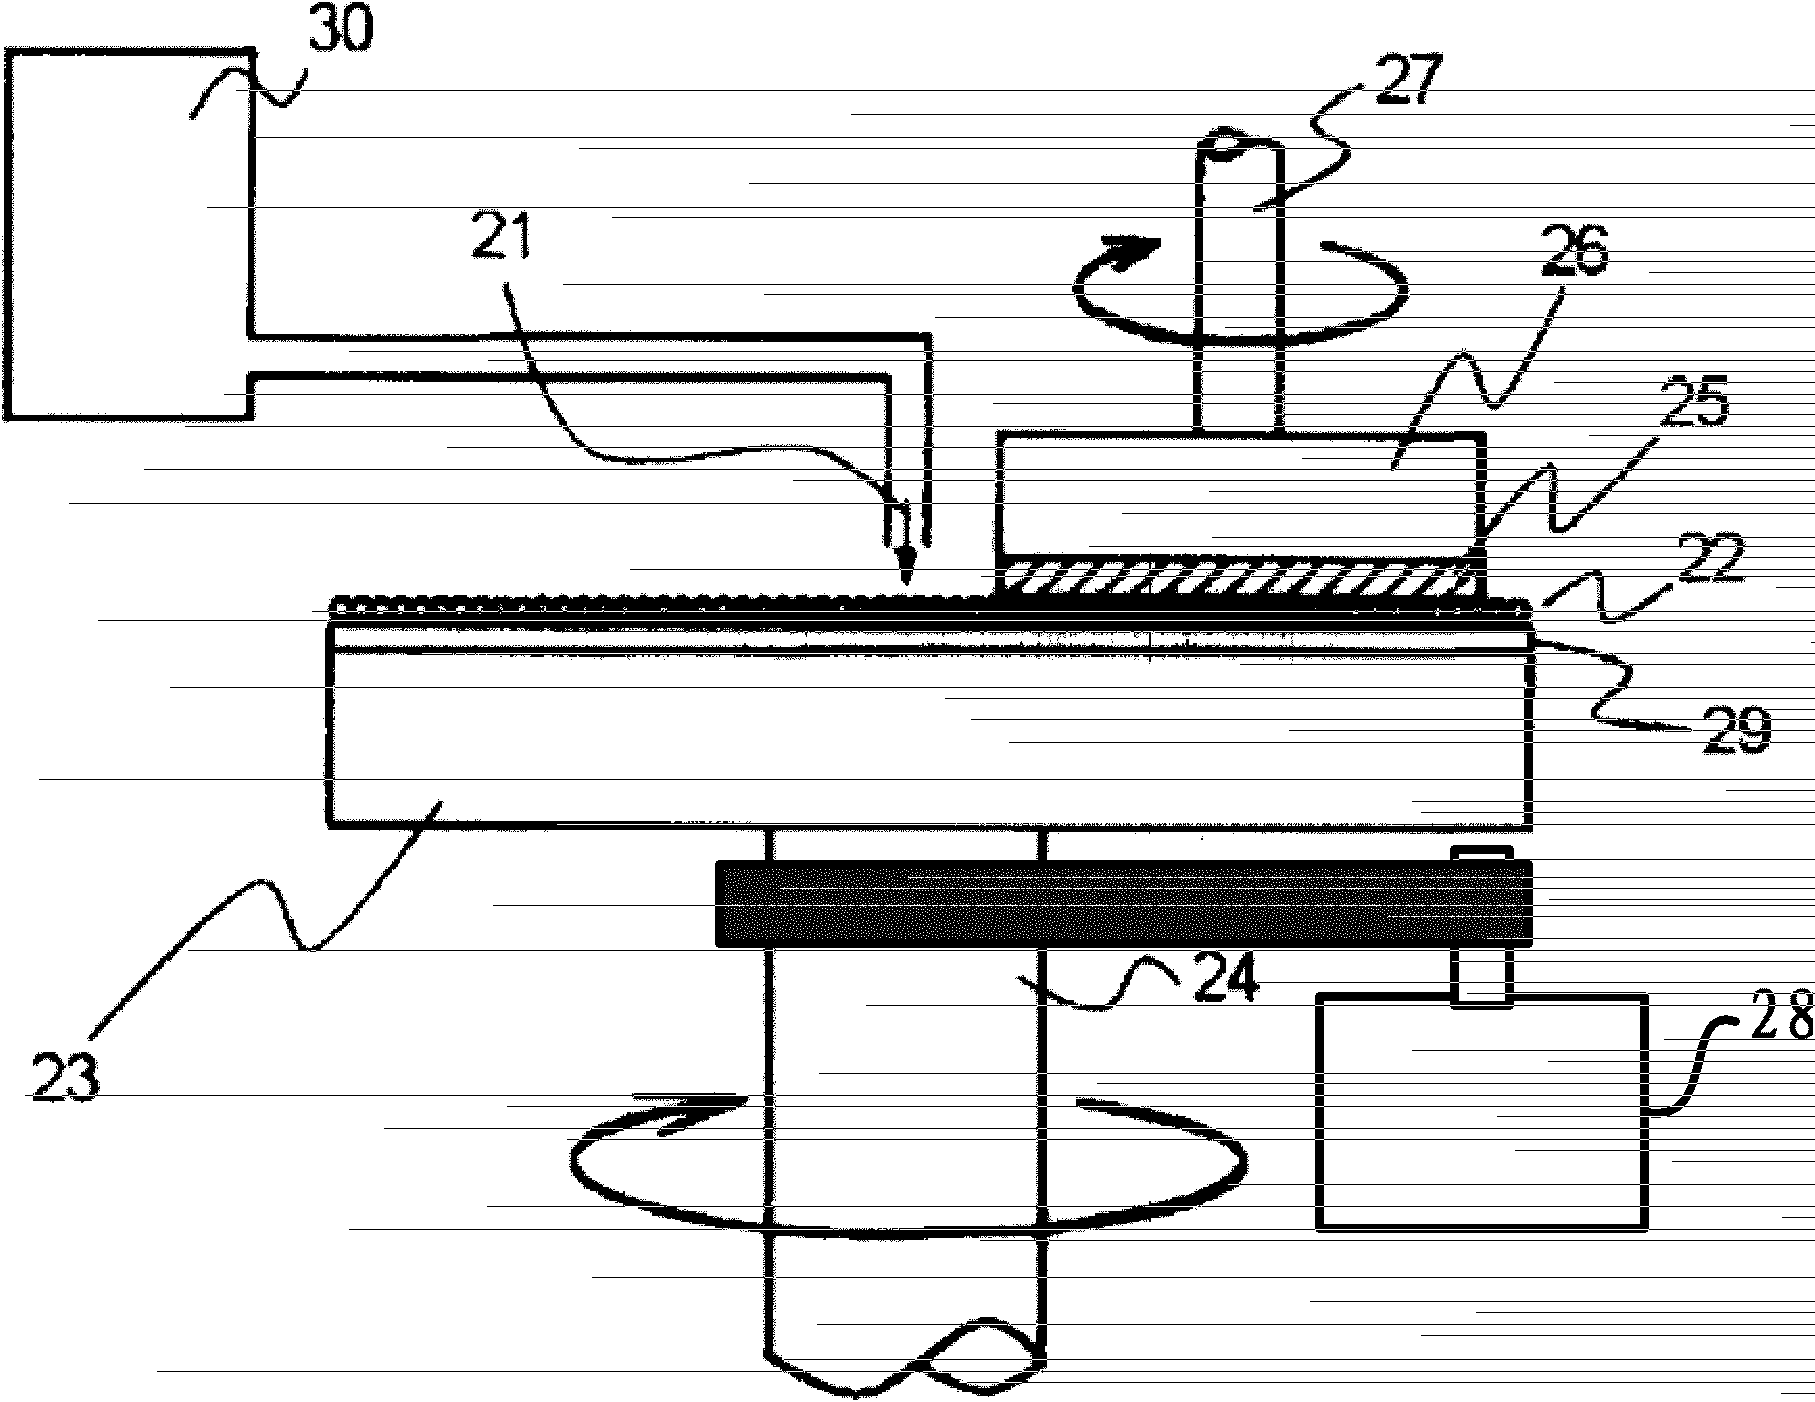 Chemical mechanical grinding device